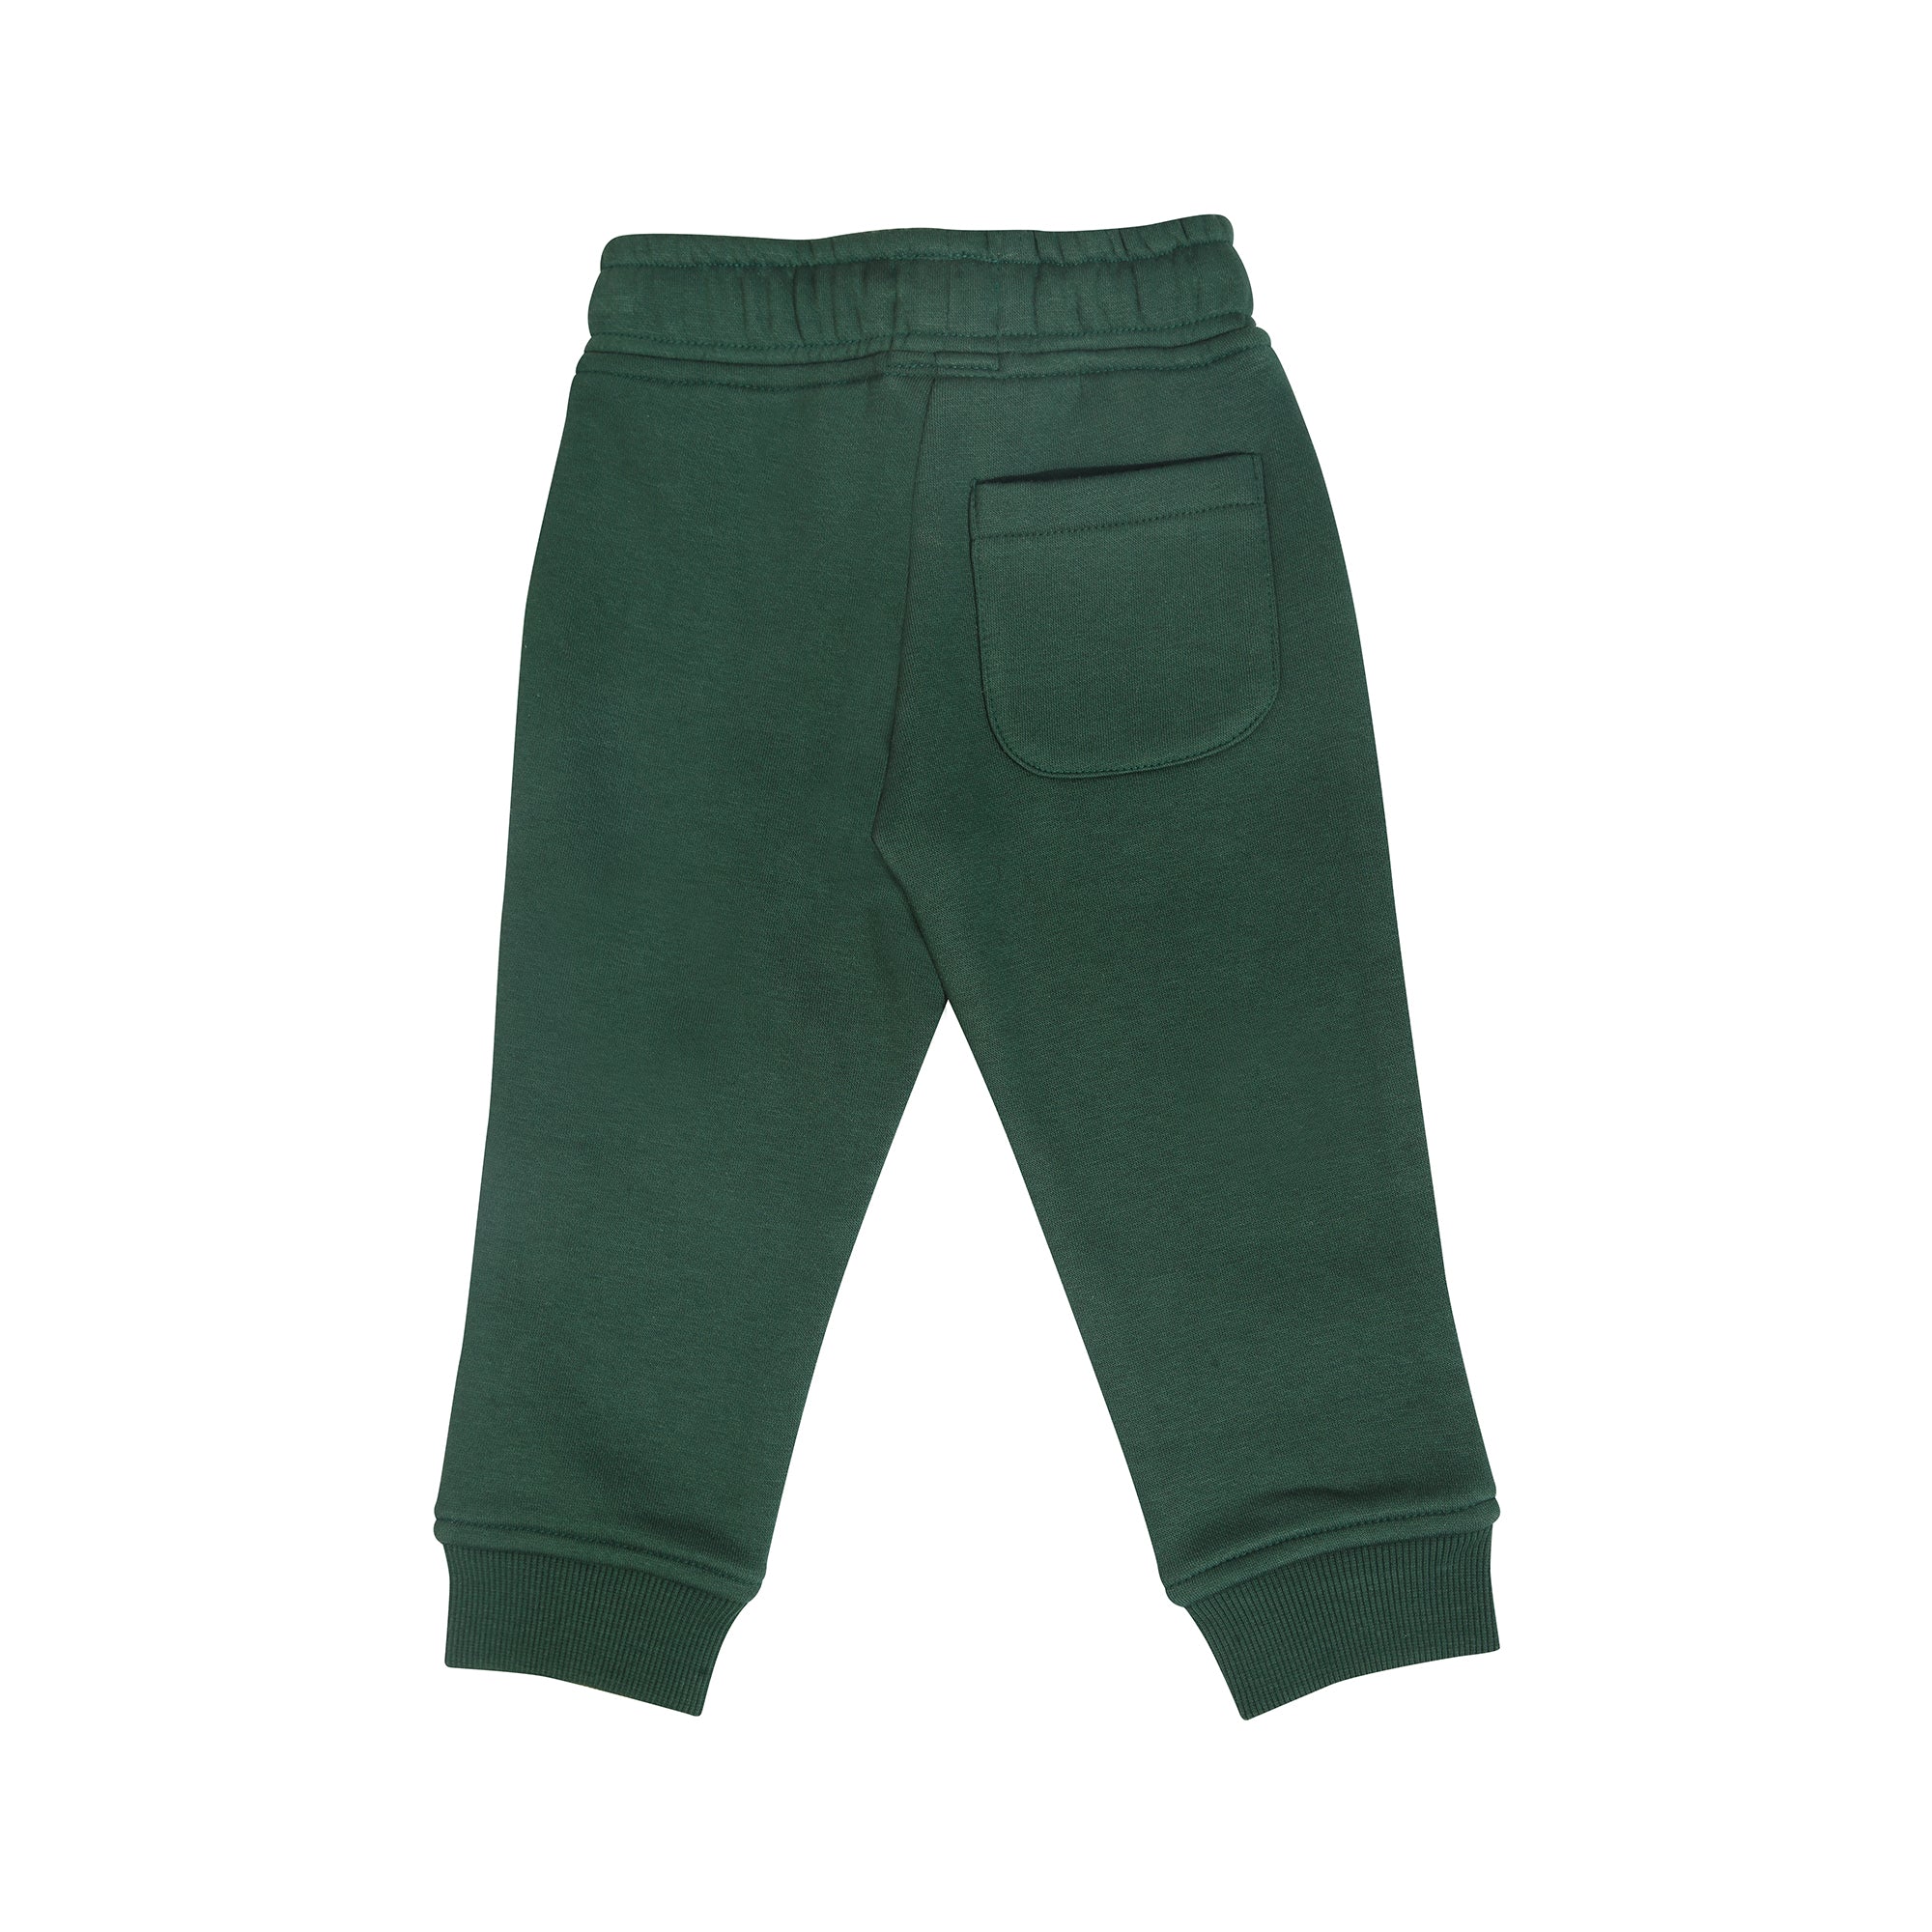 Los Angeles Olive Green Joggers